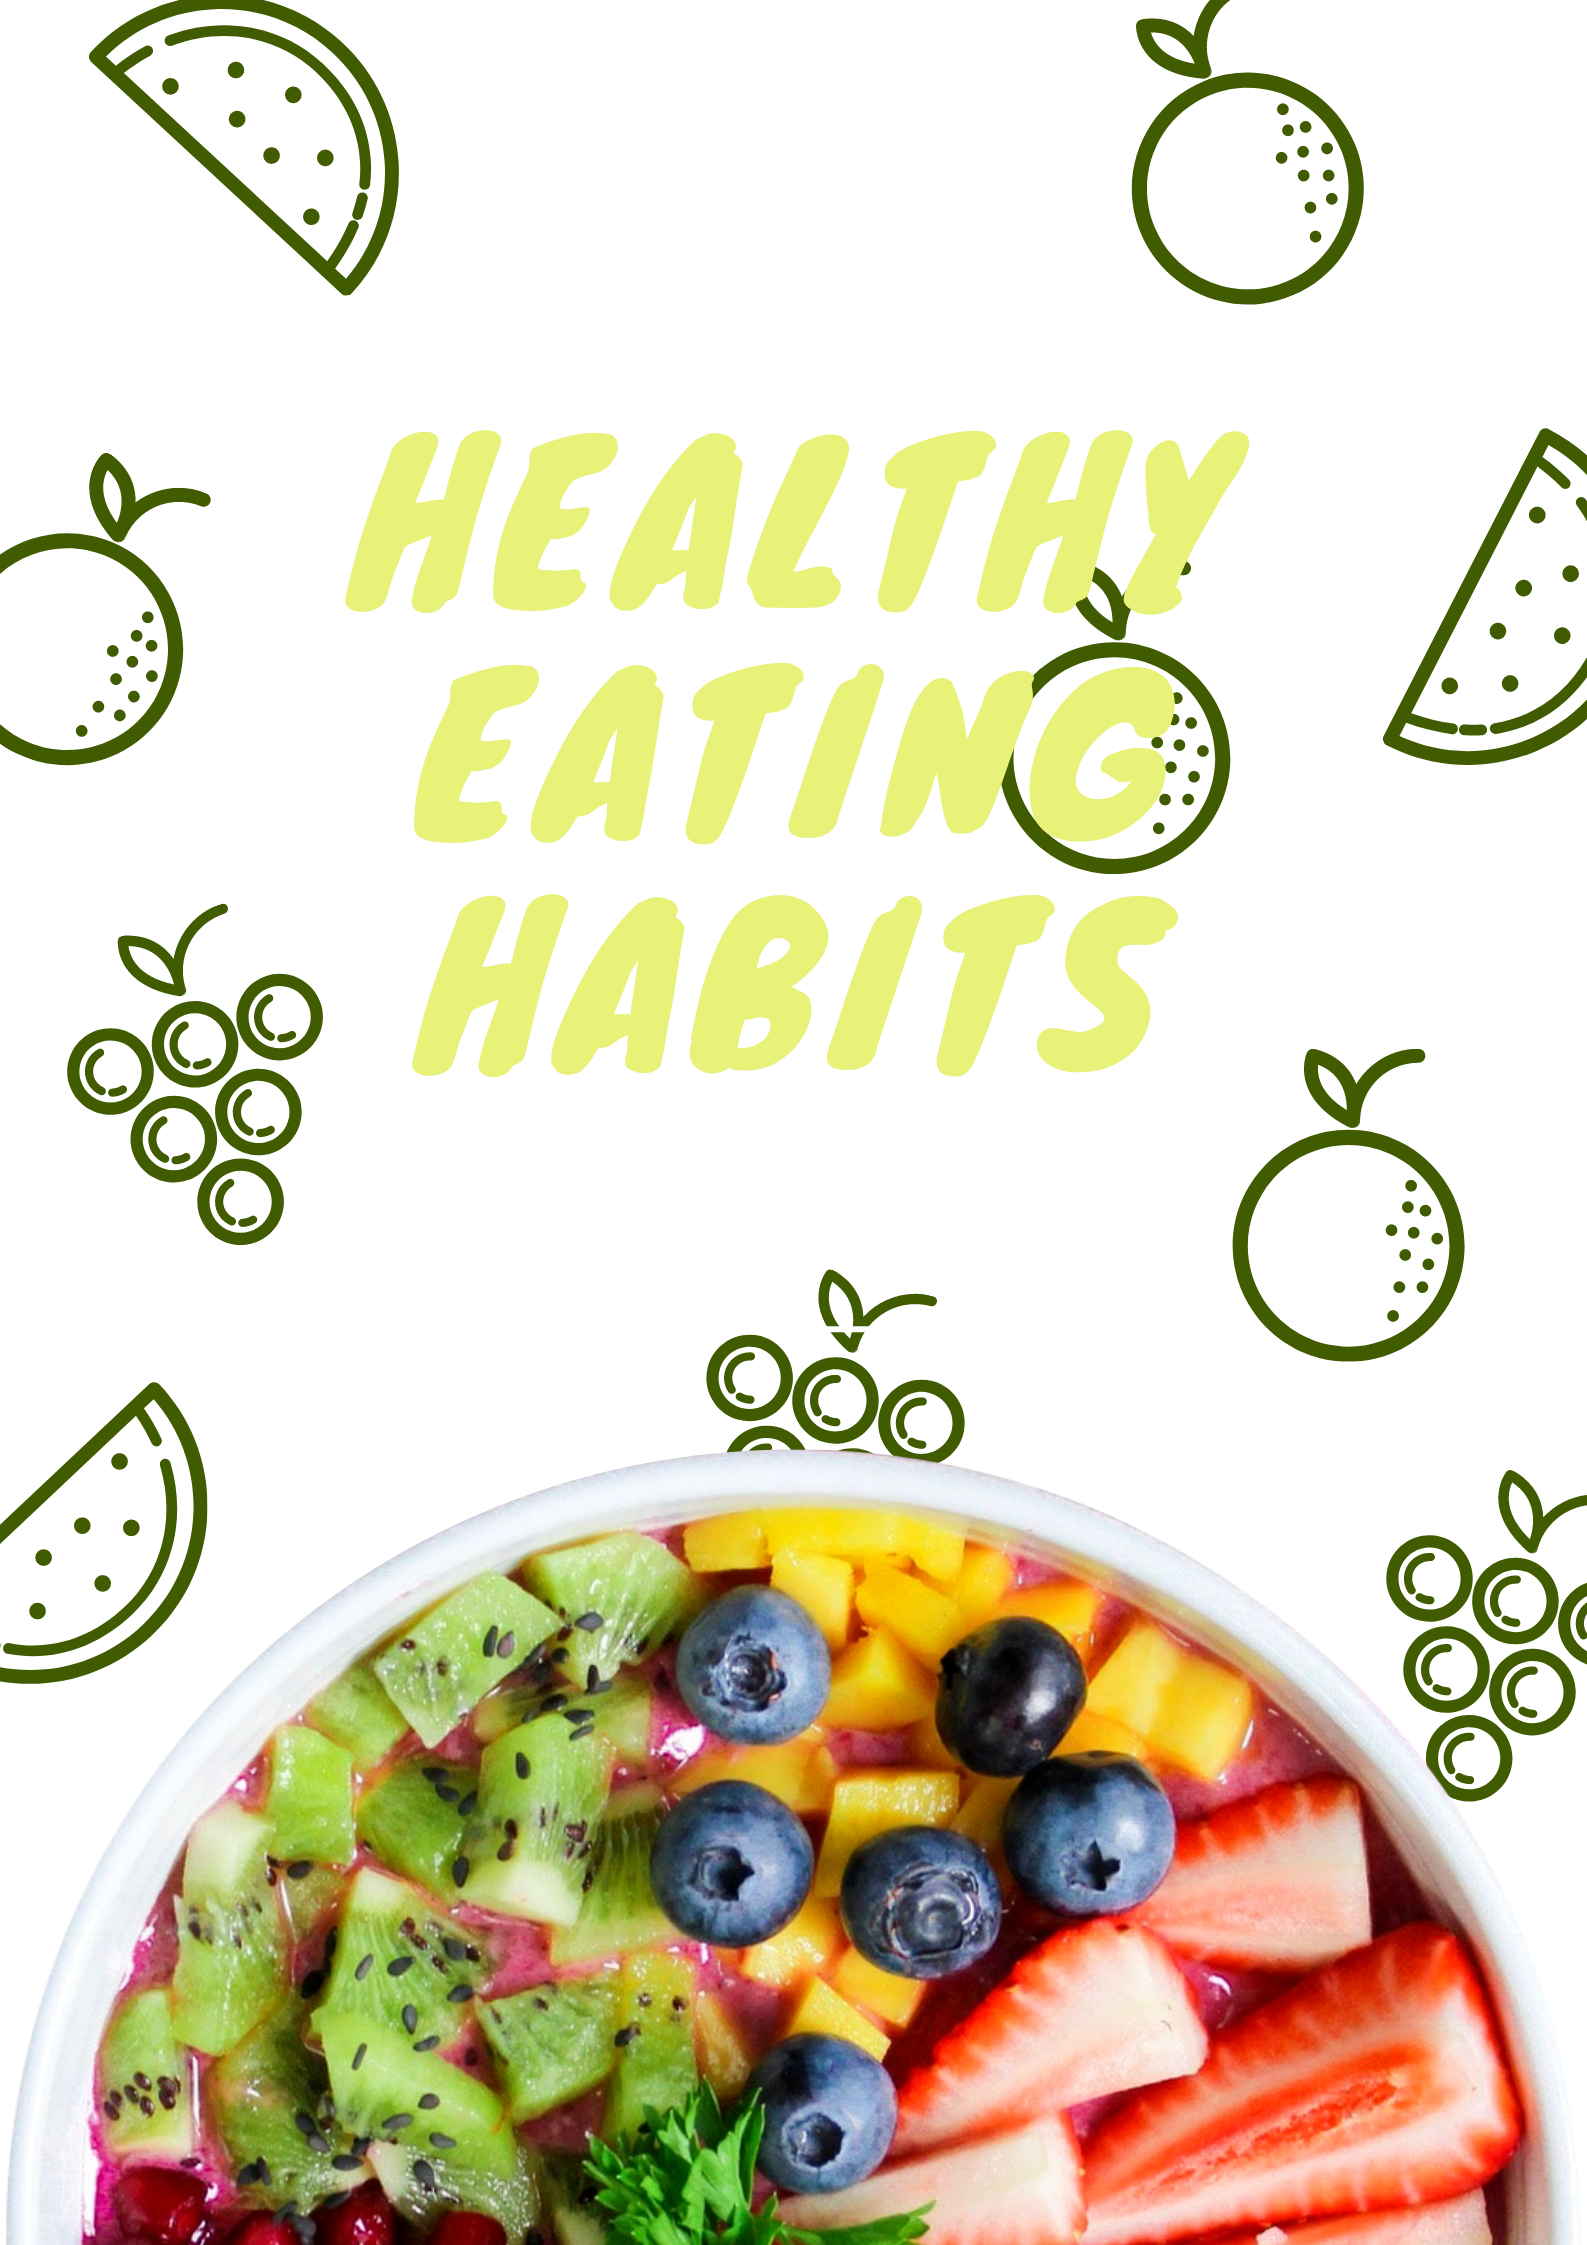 Change your eating habits